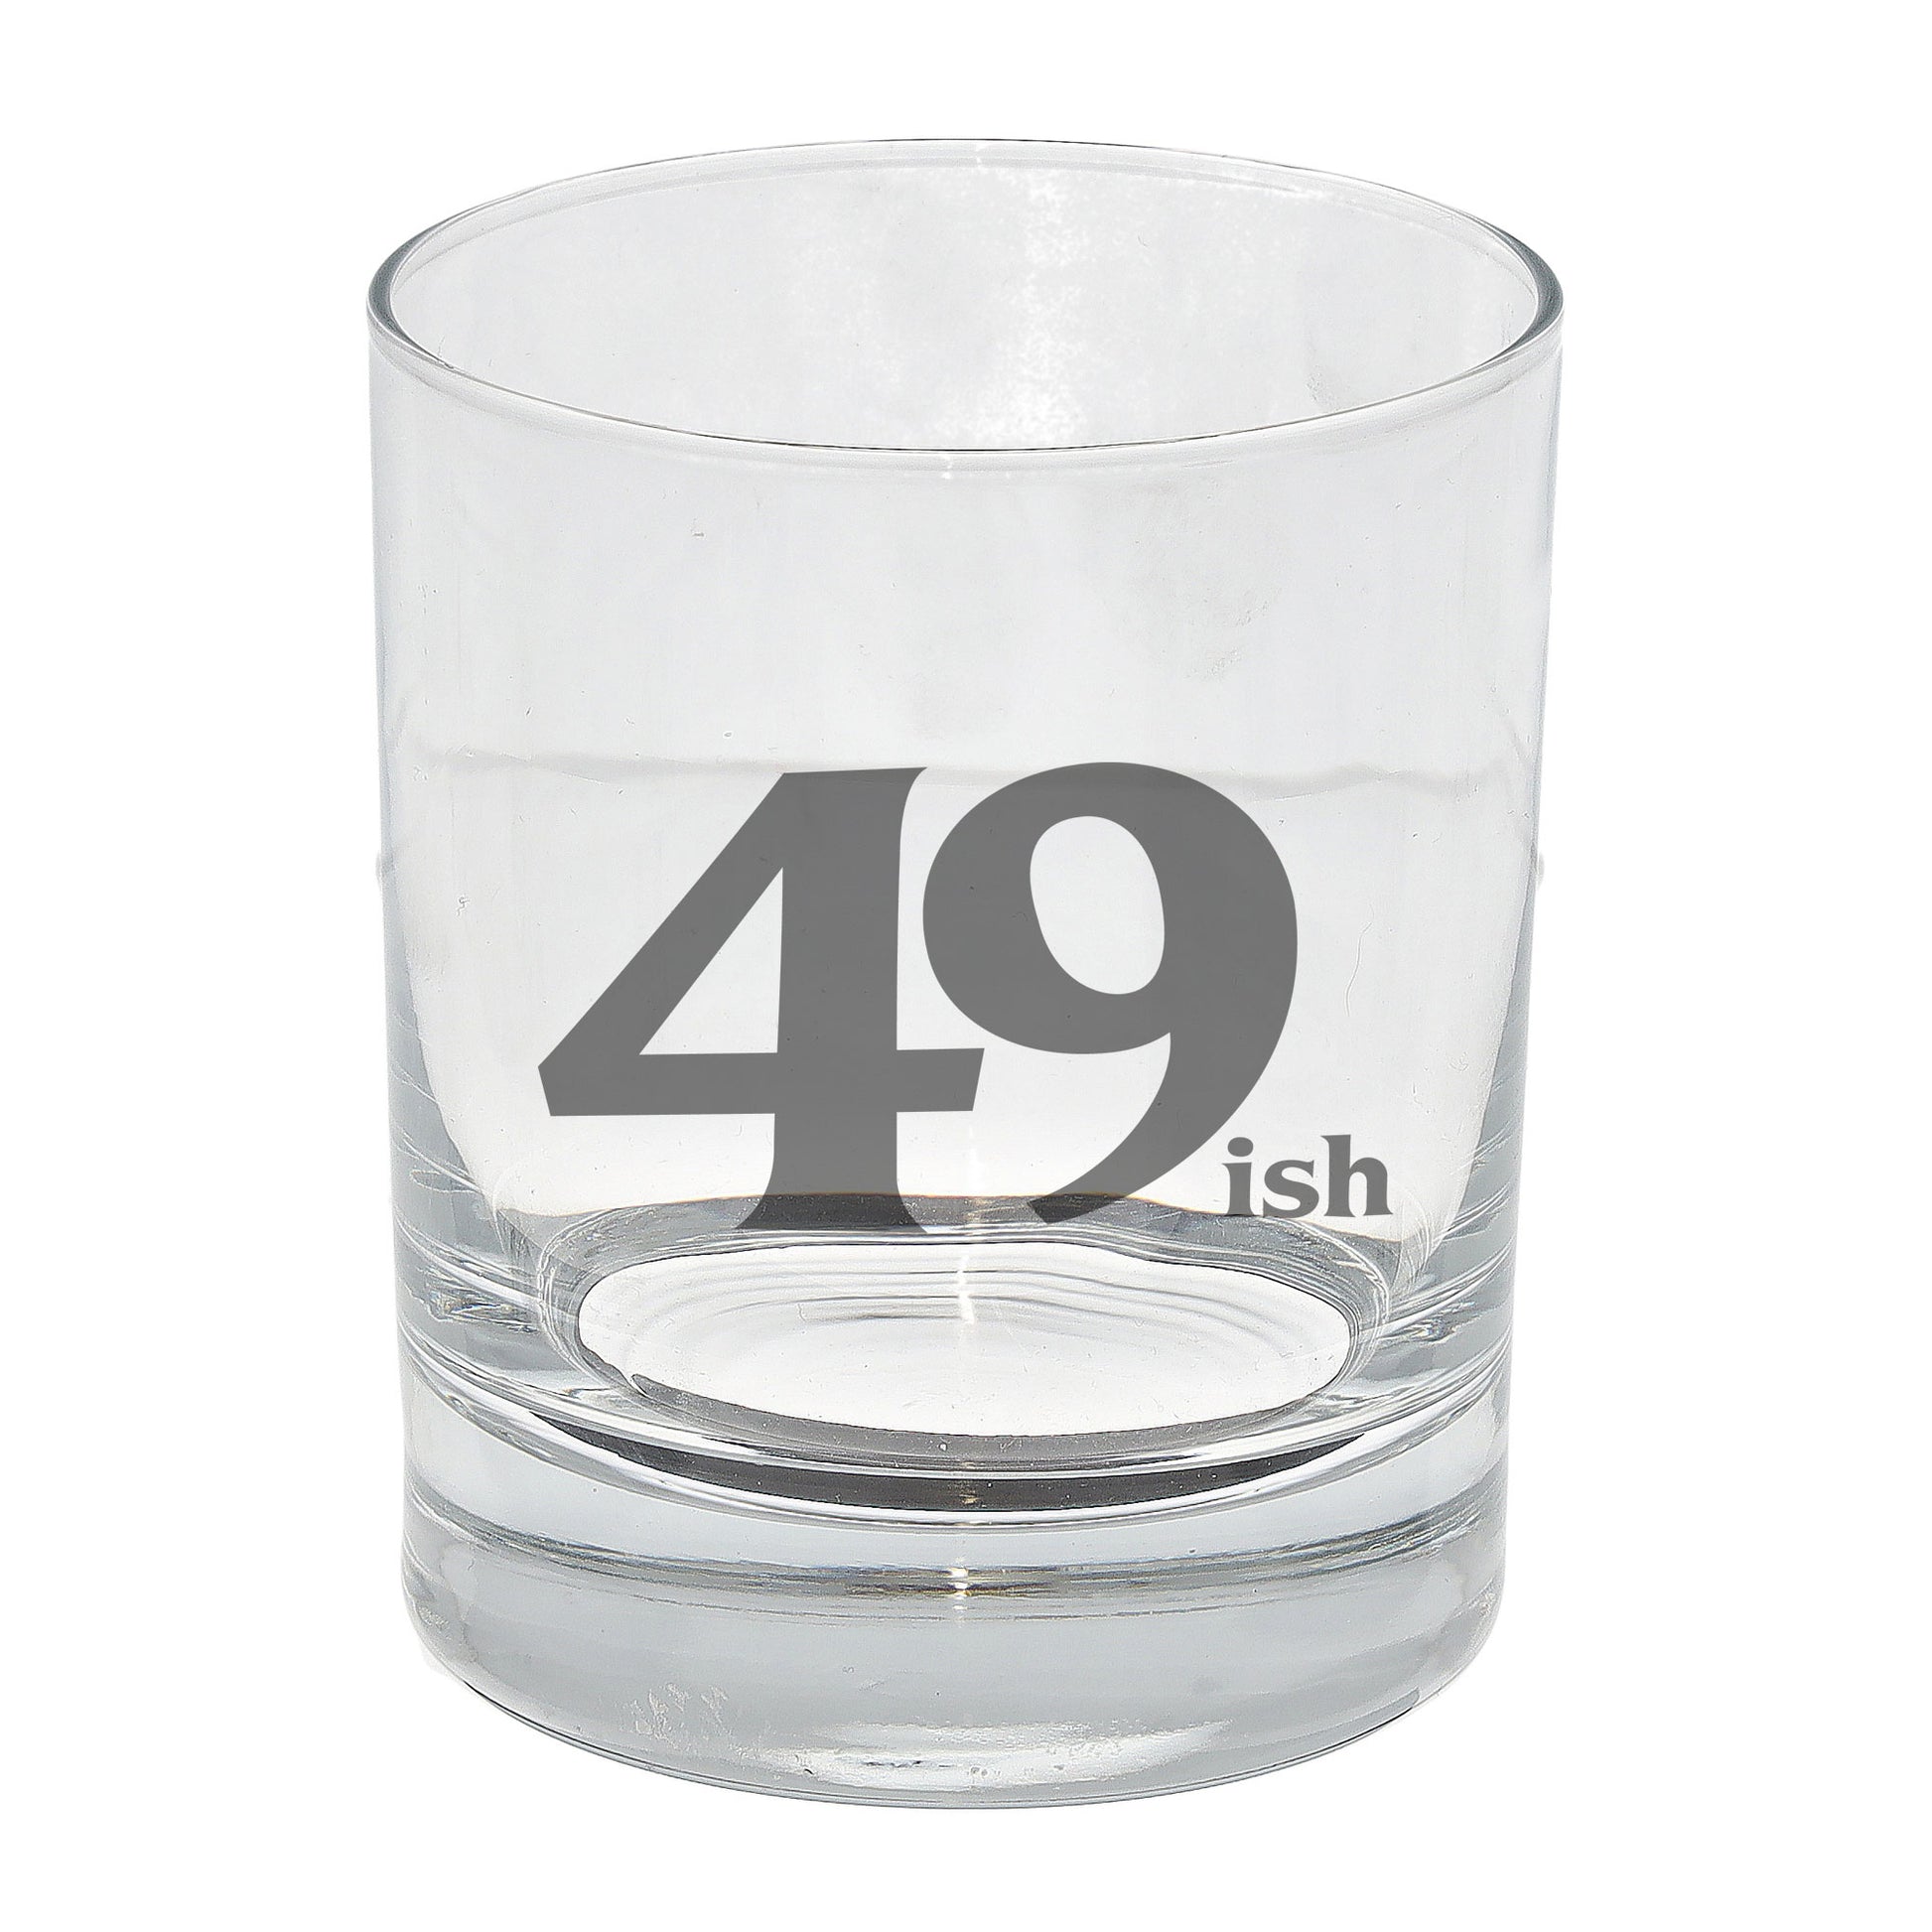 49ish Whisky Glass and/or Coaster Set  - Always Looking Good - Whisky Glass On Its Own  